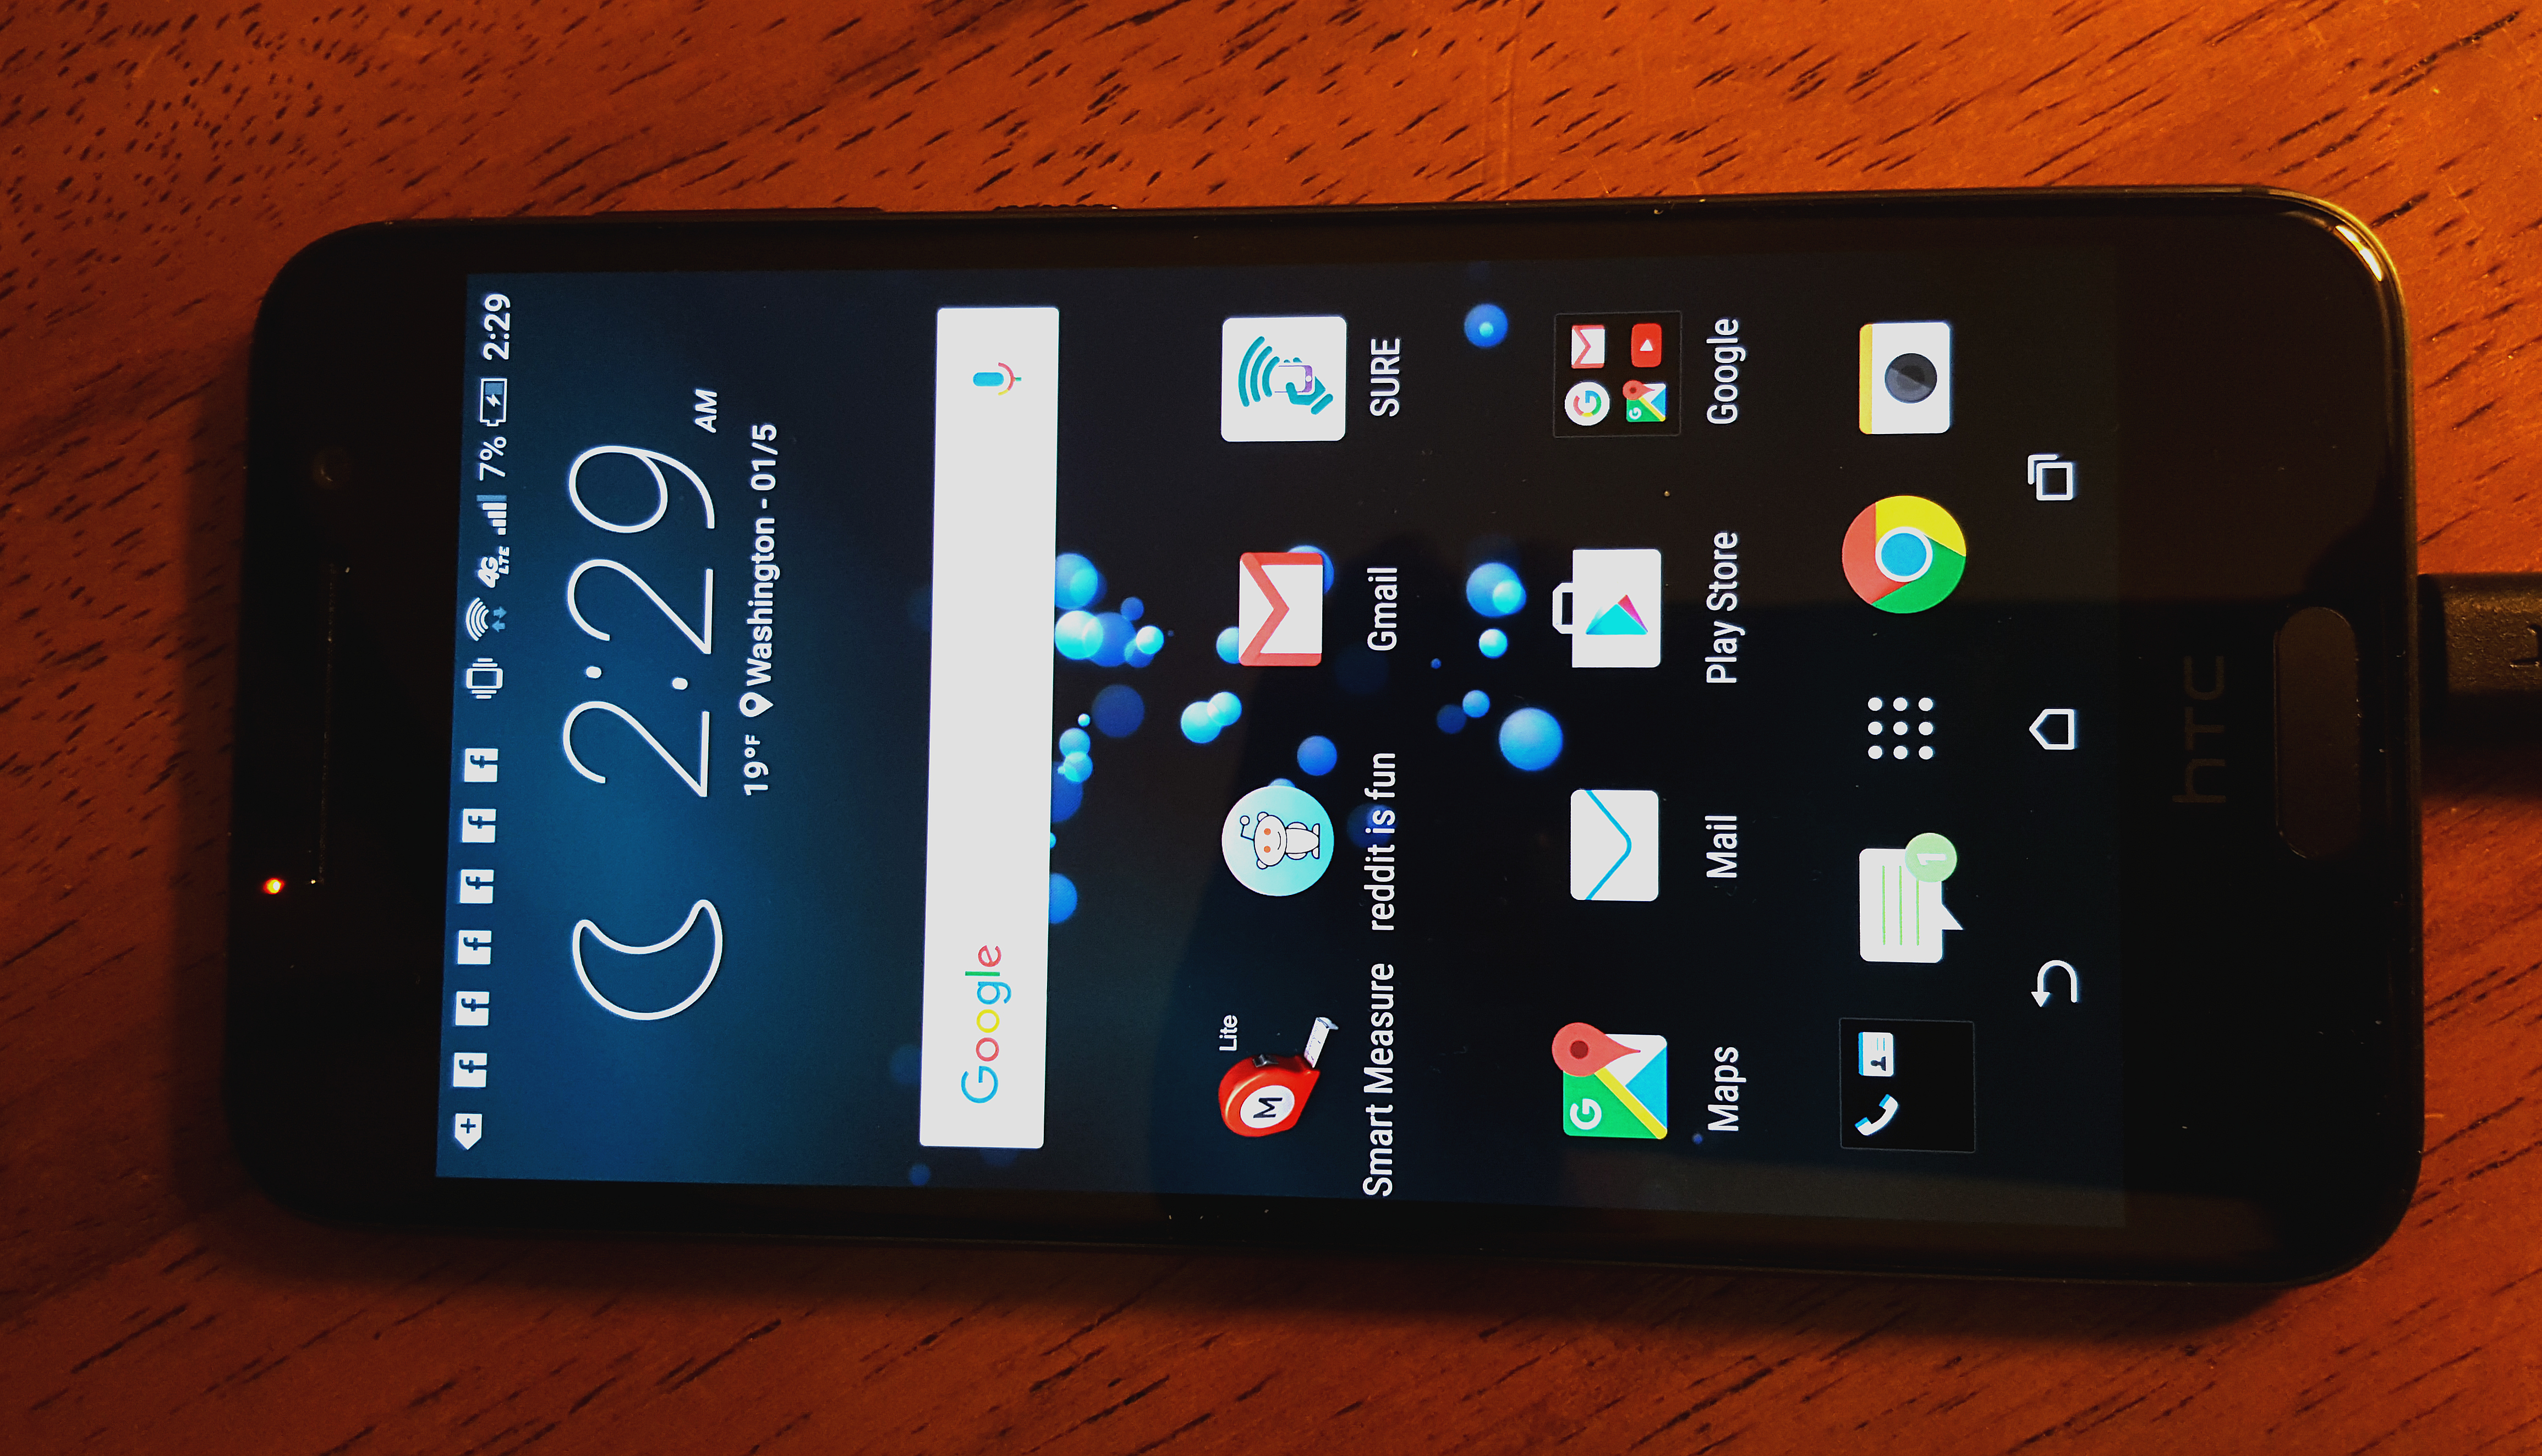  Lg g2, Application android, Camera apps